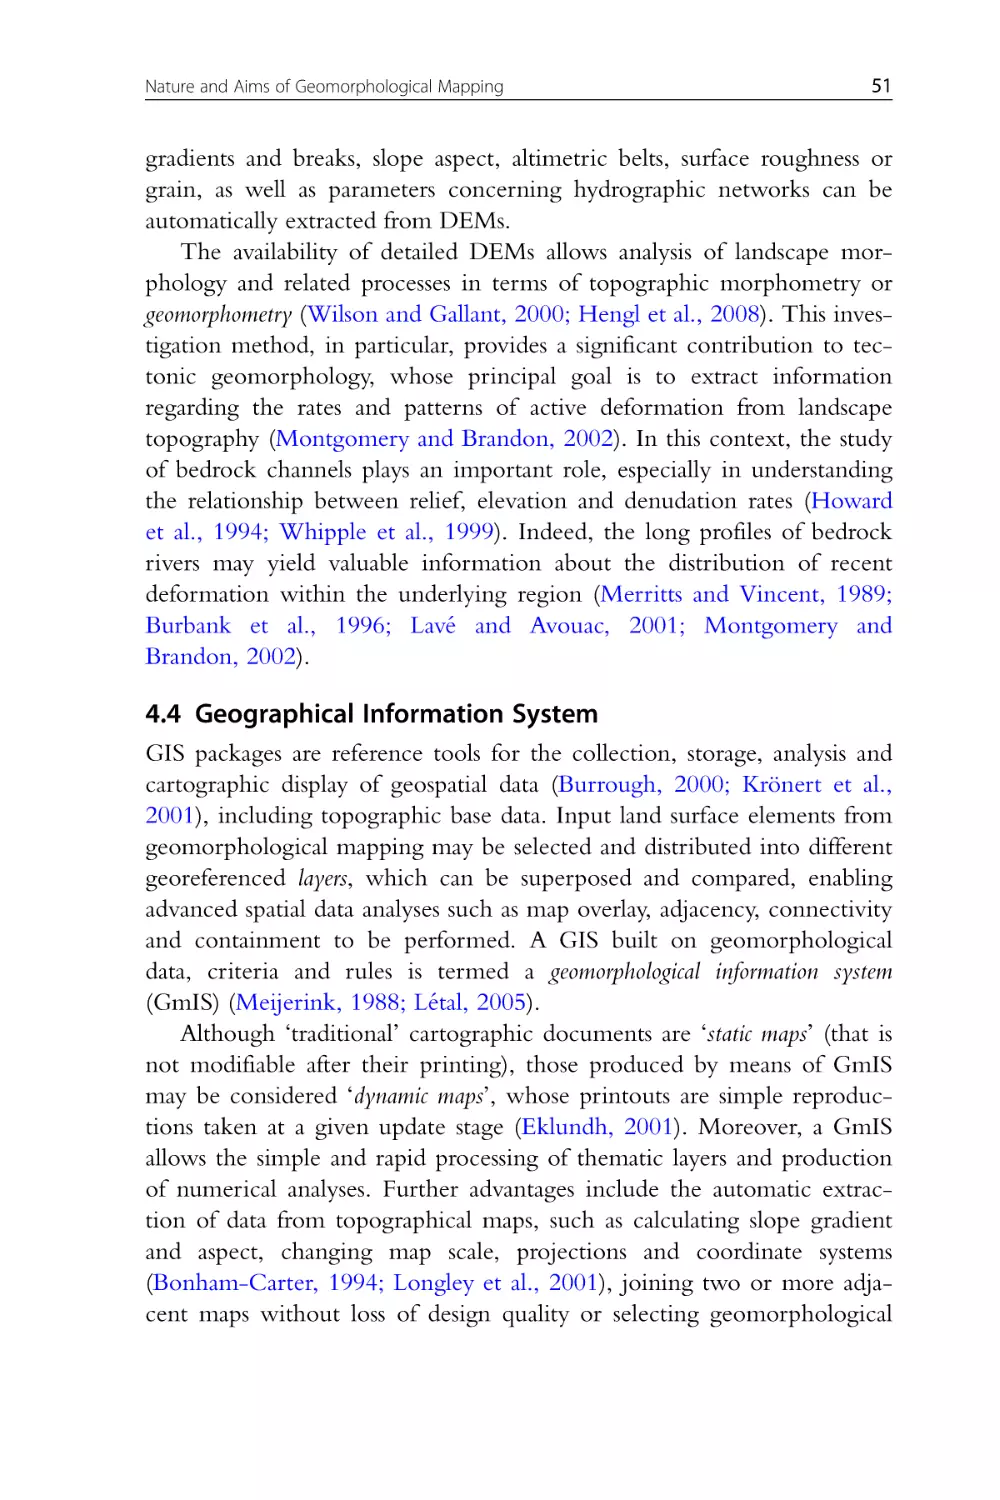 4.4 Geographical Information System